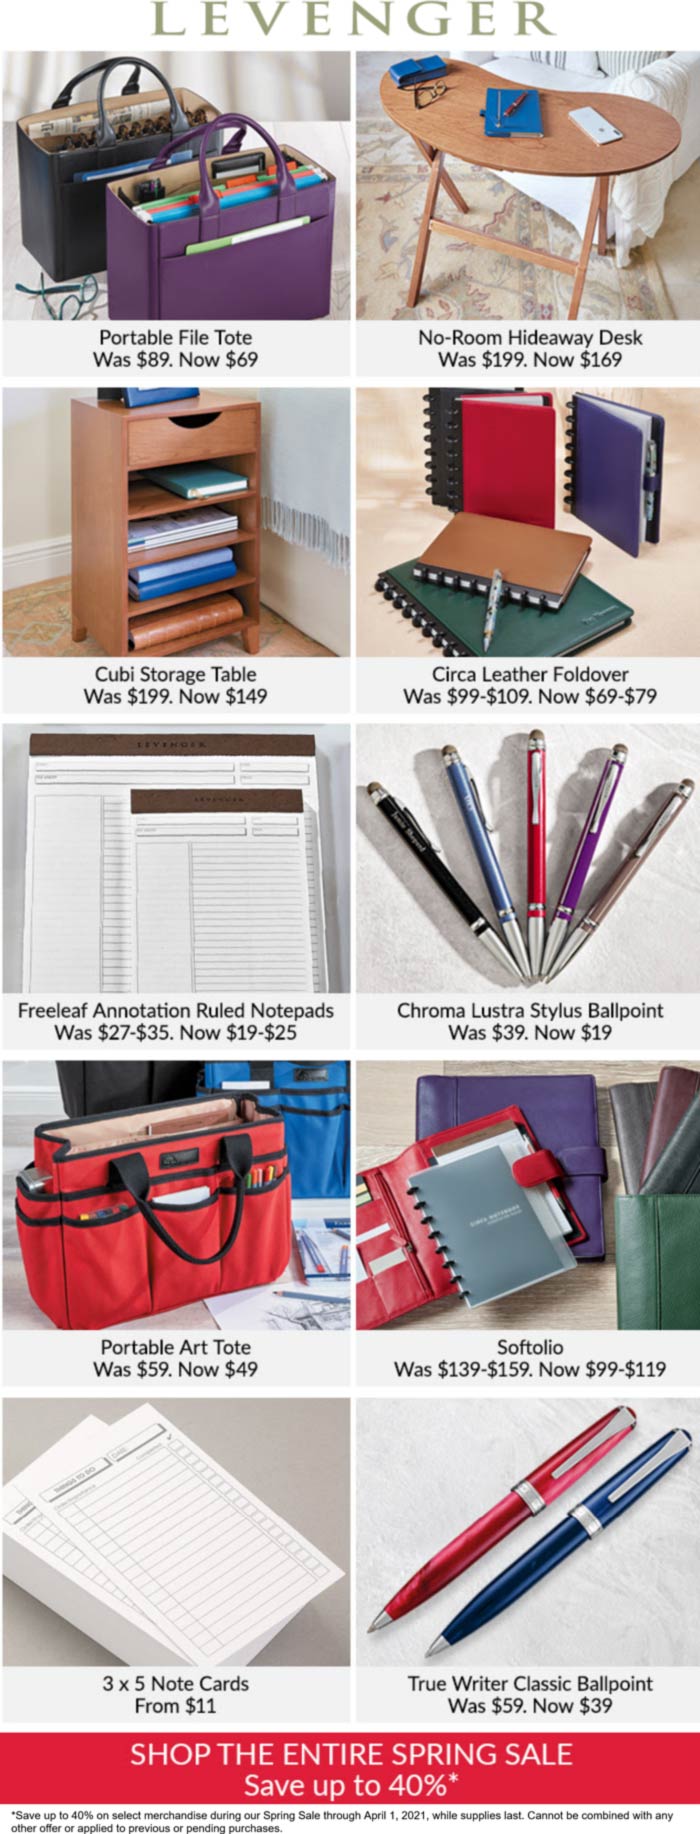 Levenger stores Coupon  40% off at Levenger fine pens, planners, paper & leather goods #levenger 